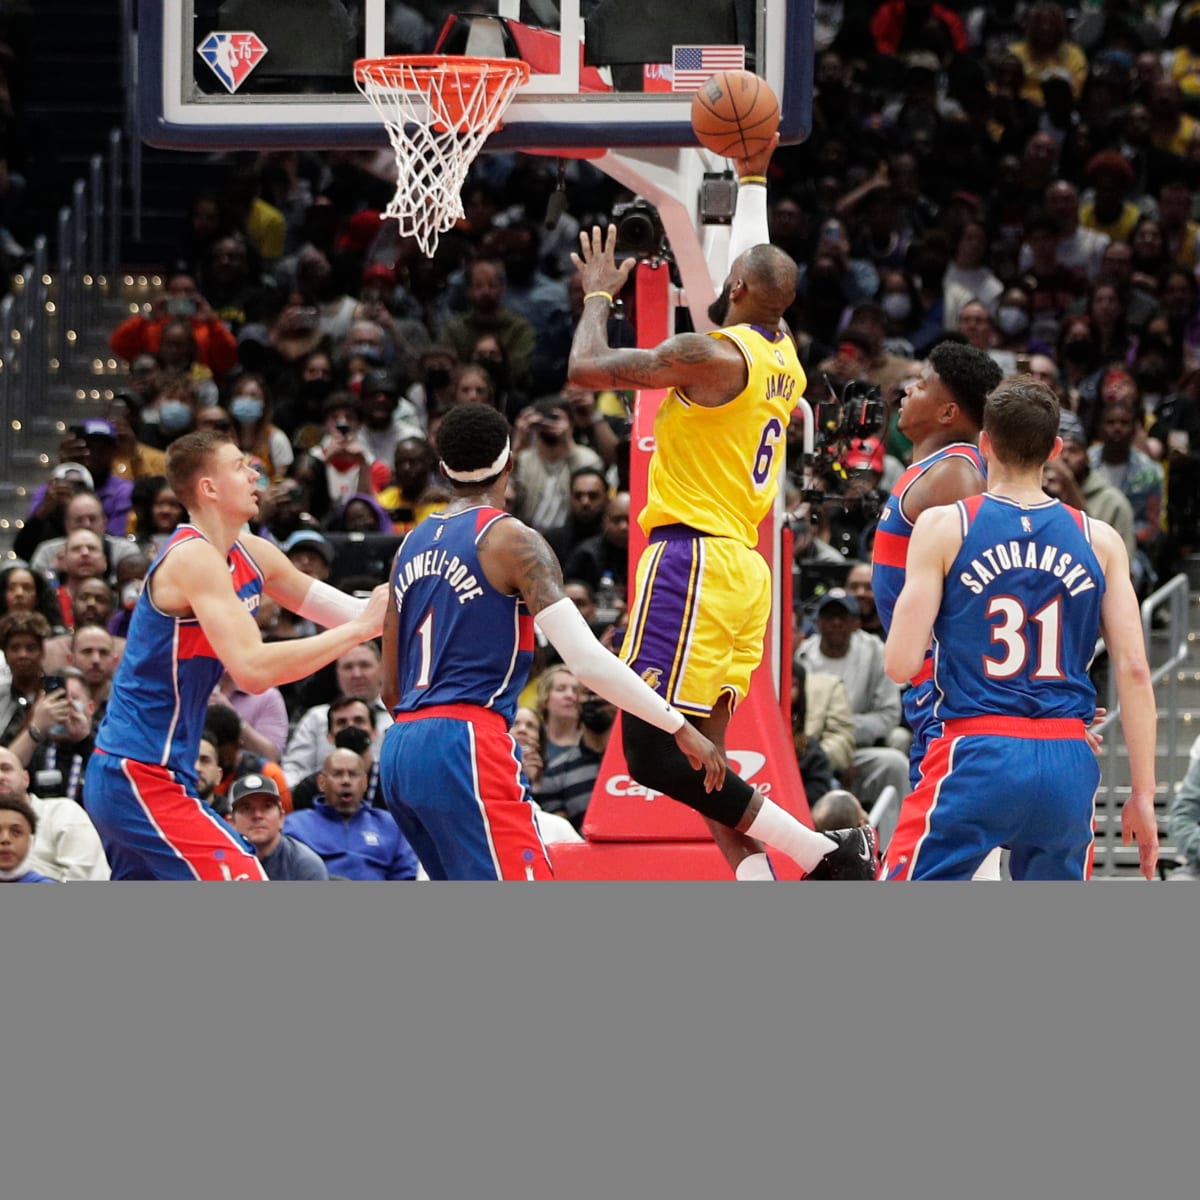 Karl Malone of the Utah Jazz goes for a dunk against the Houston